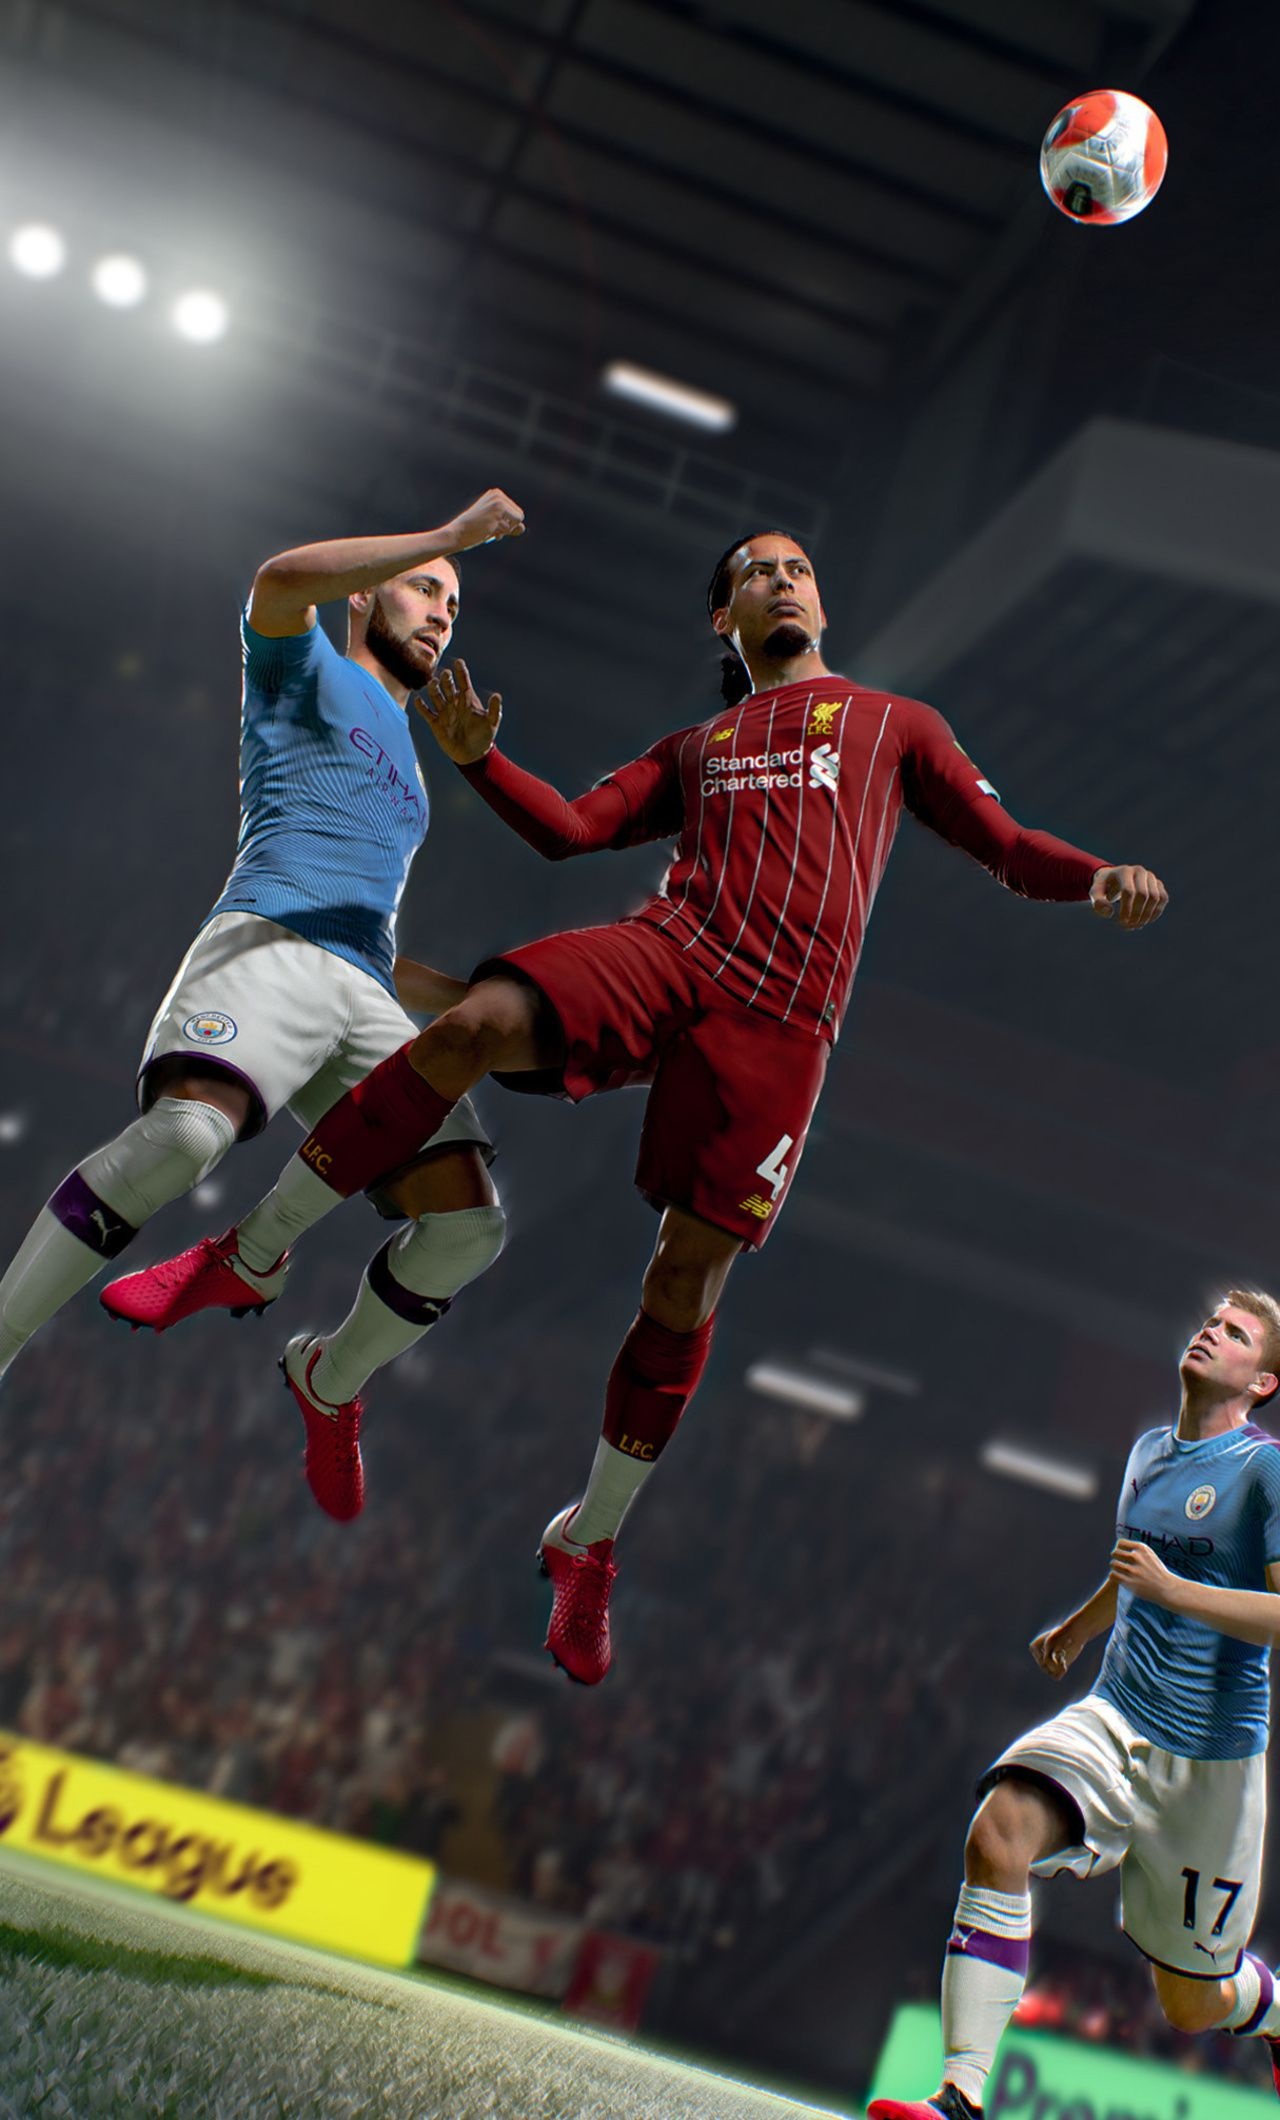 Sports game euphoria, FIFA wallpapers, Gaming passion, Football craze, 1280x2120 HD Phone